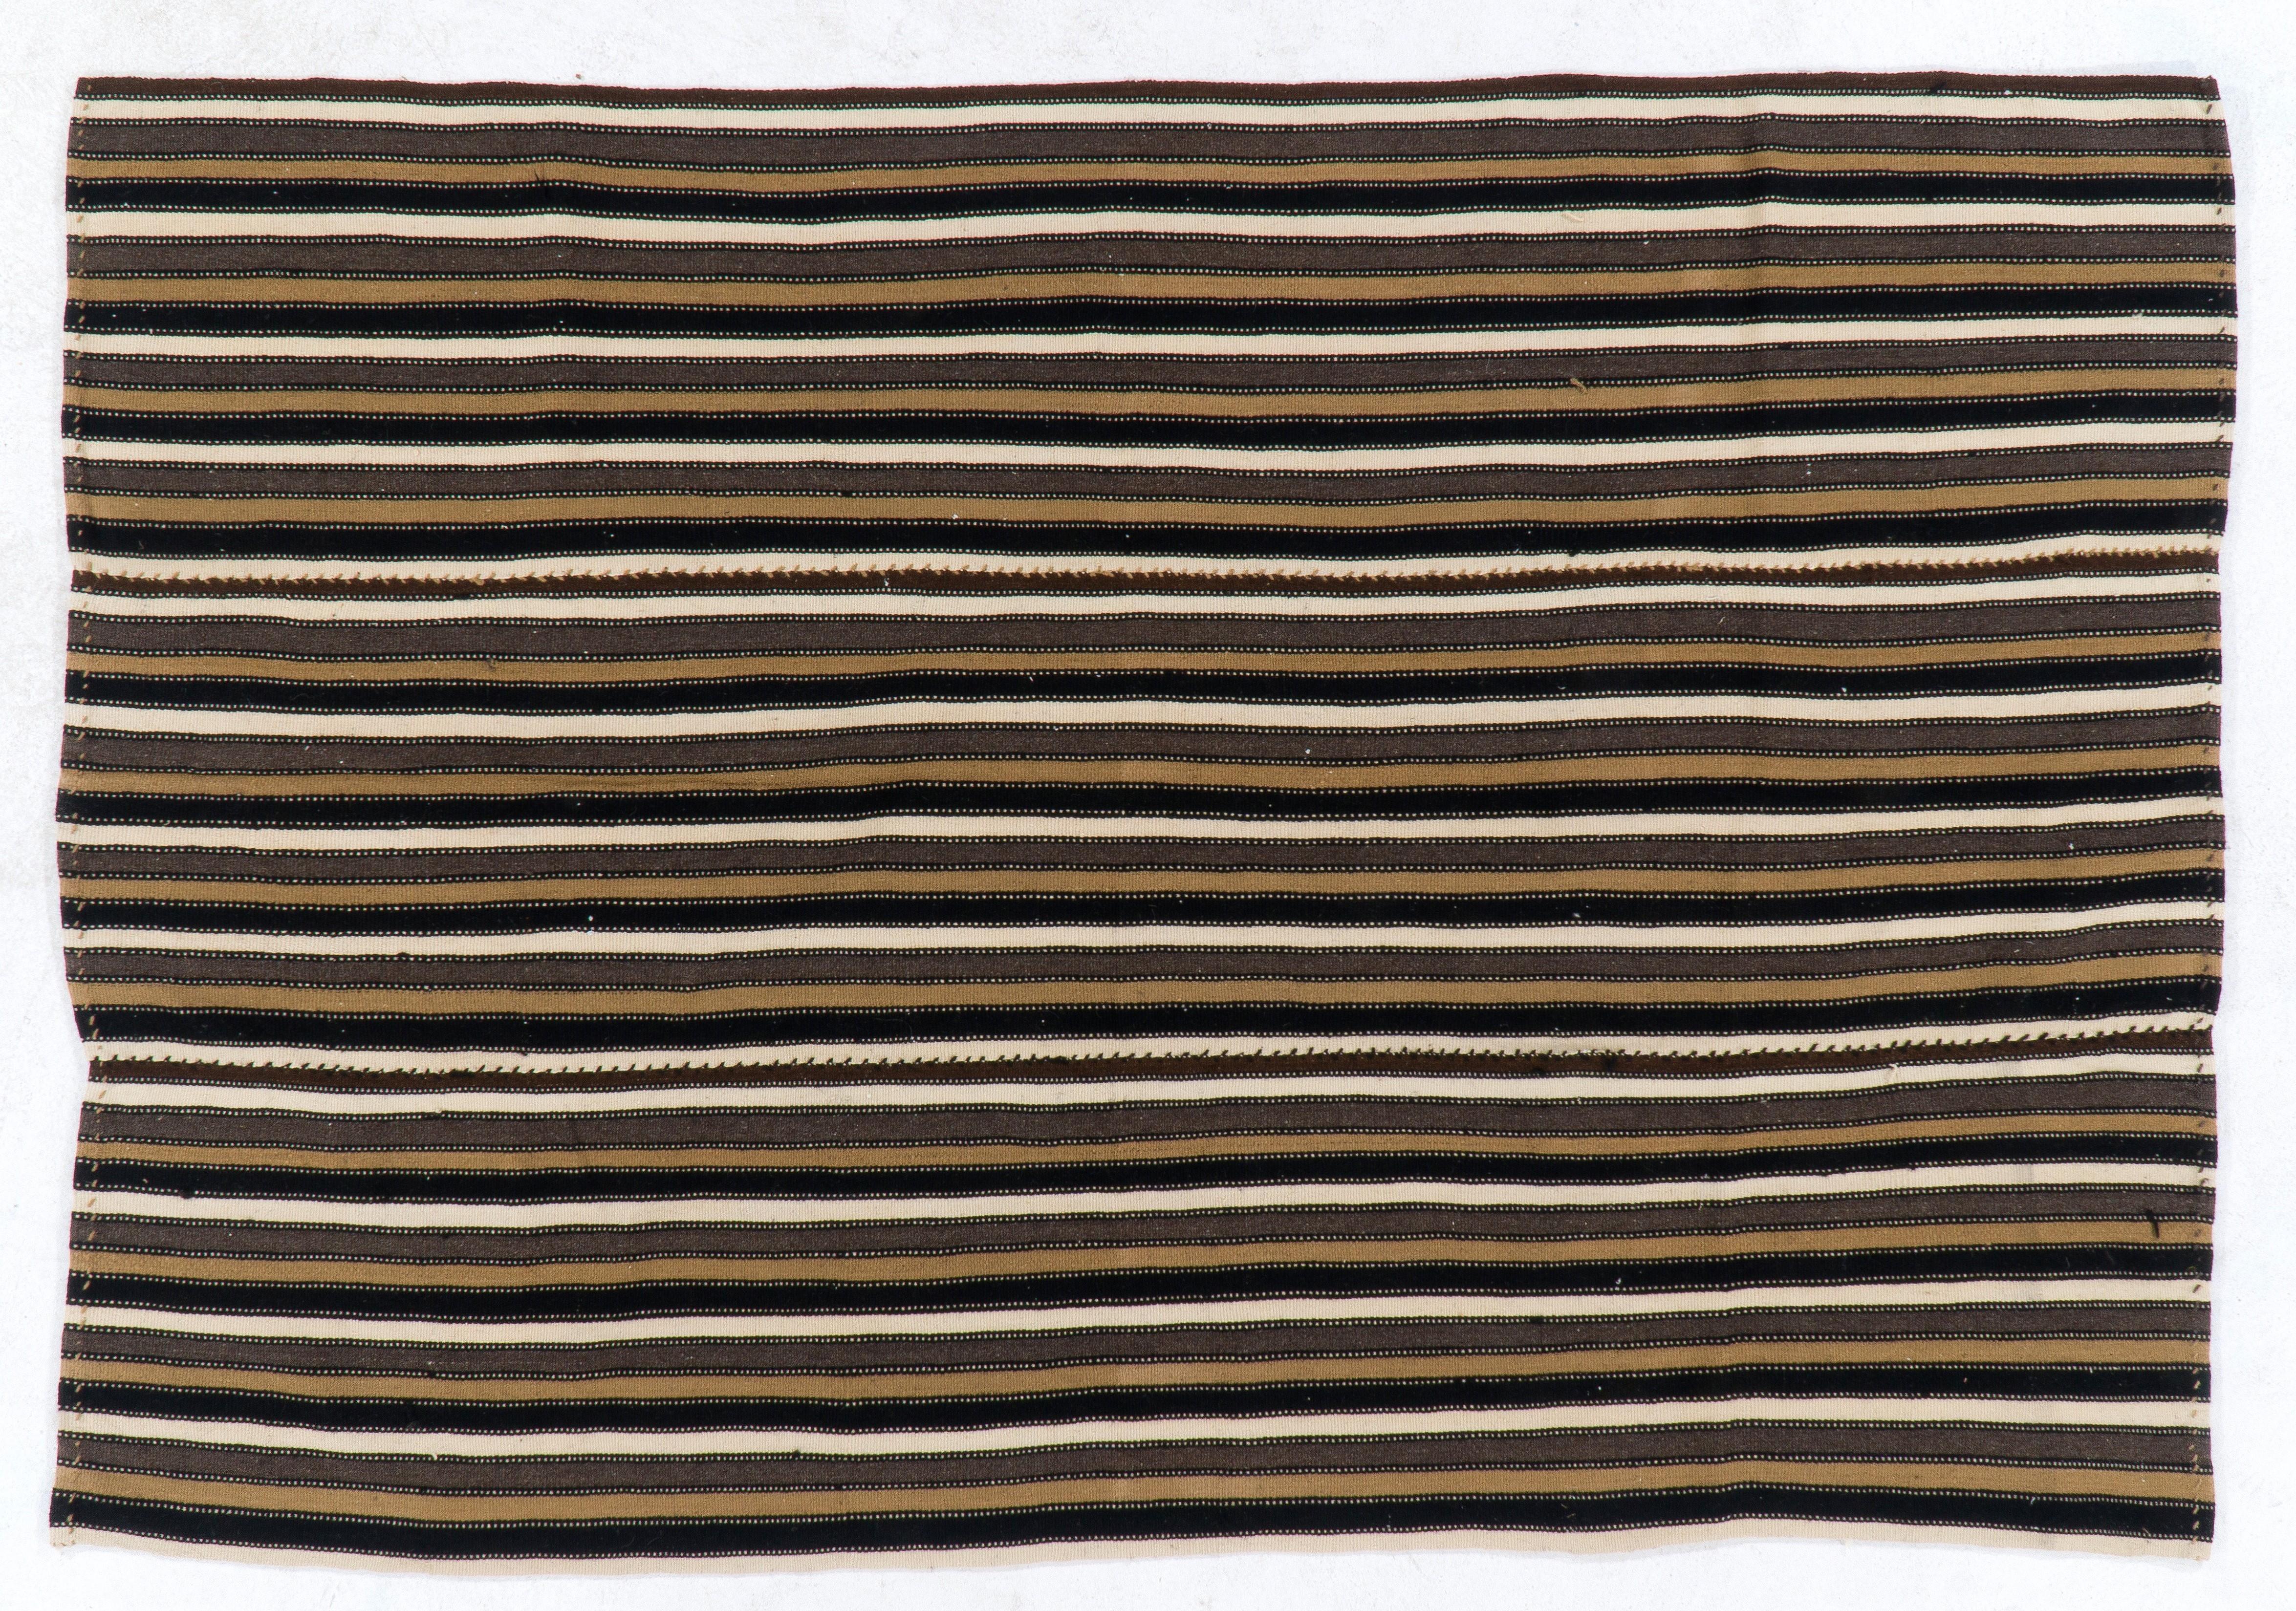 This beautiful and simple flat-woven rug is made of wool in brown, taupe, ivory and black colors. It was woven by semi nomadic villagers in Central Anatolia for domestic use. Ca 1960-1970